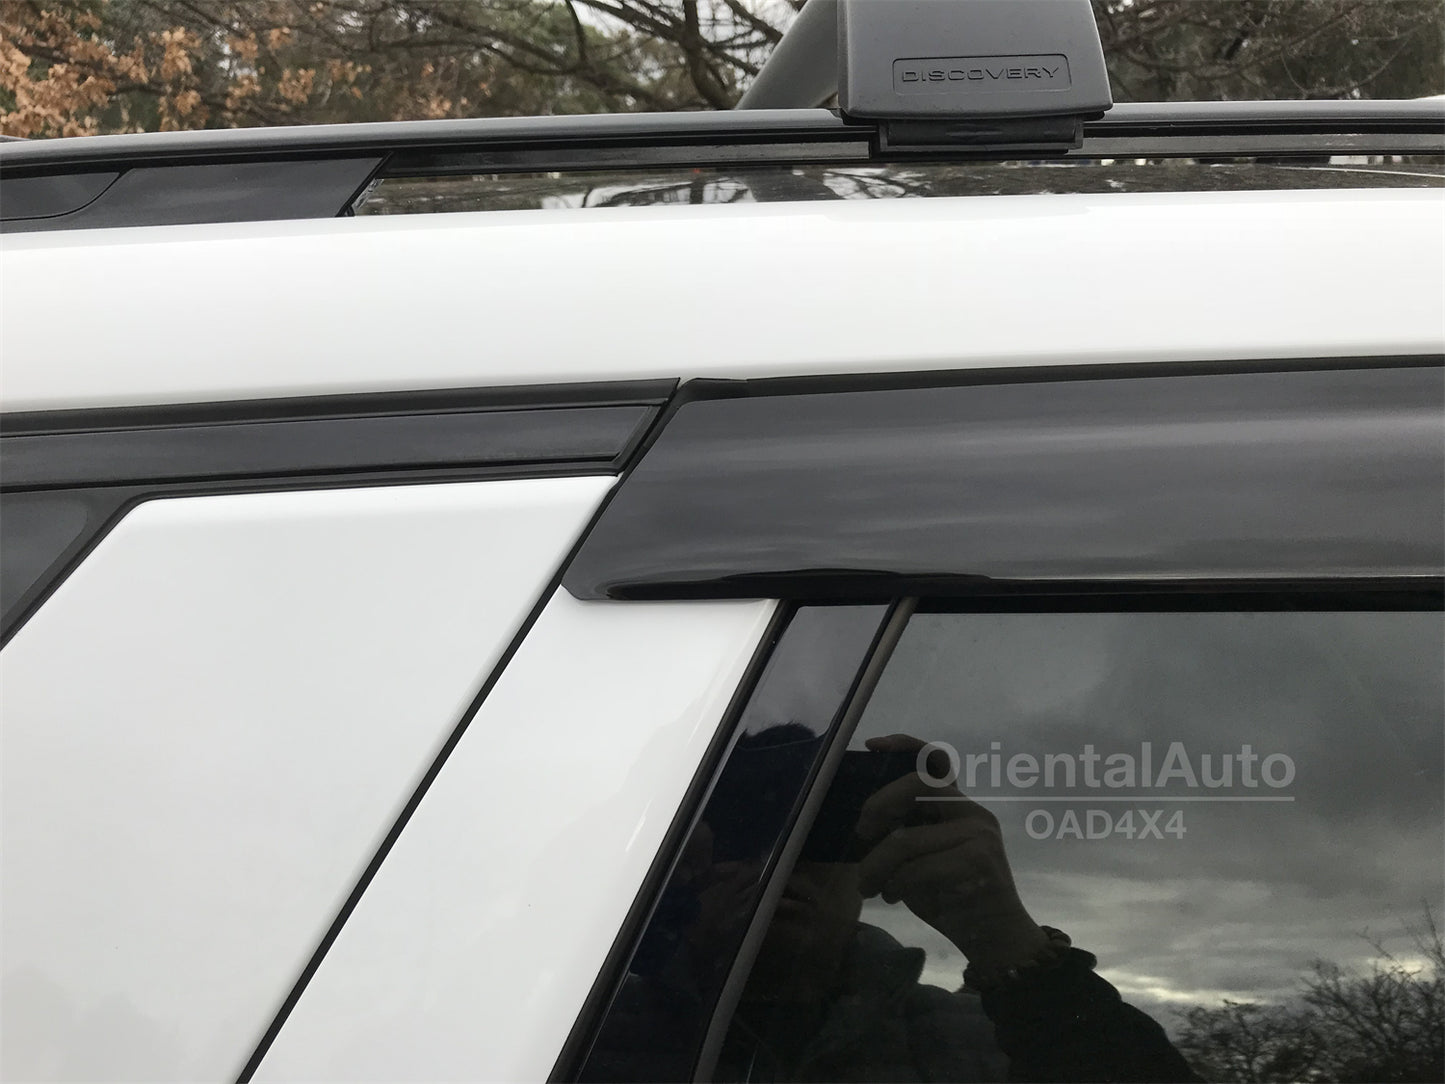 Luxury Weathershields For Land Rover Discovery Sport Weather Shields Window Visor